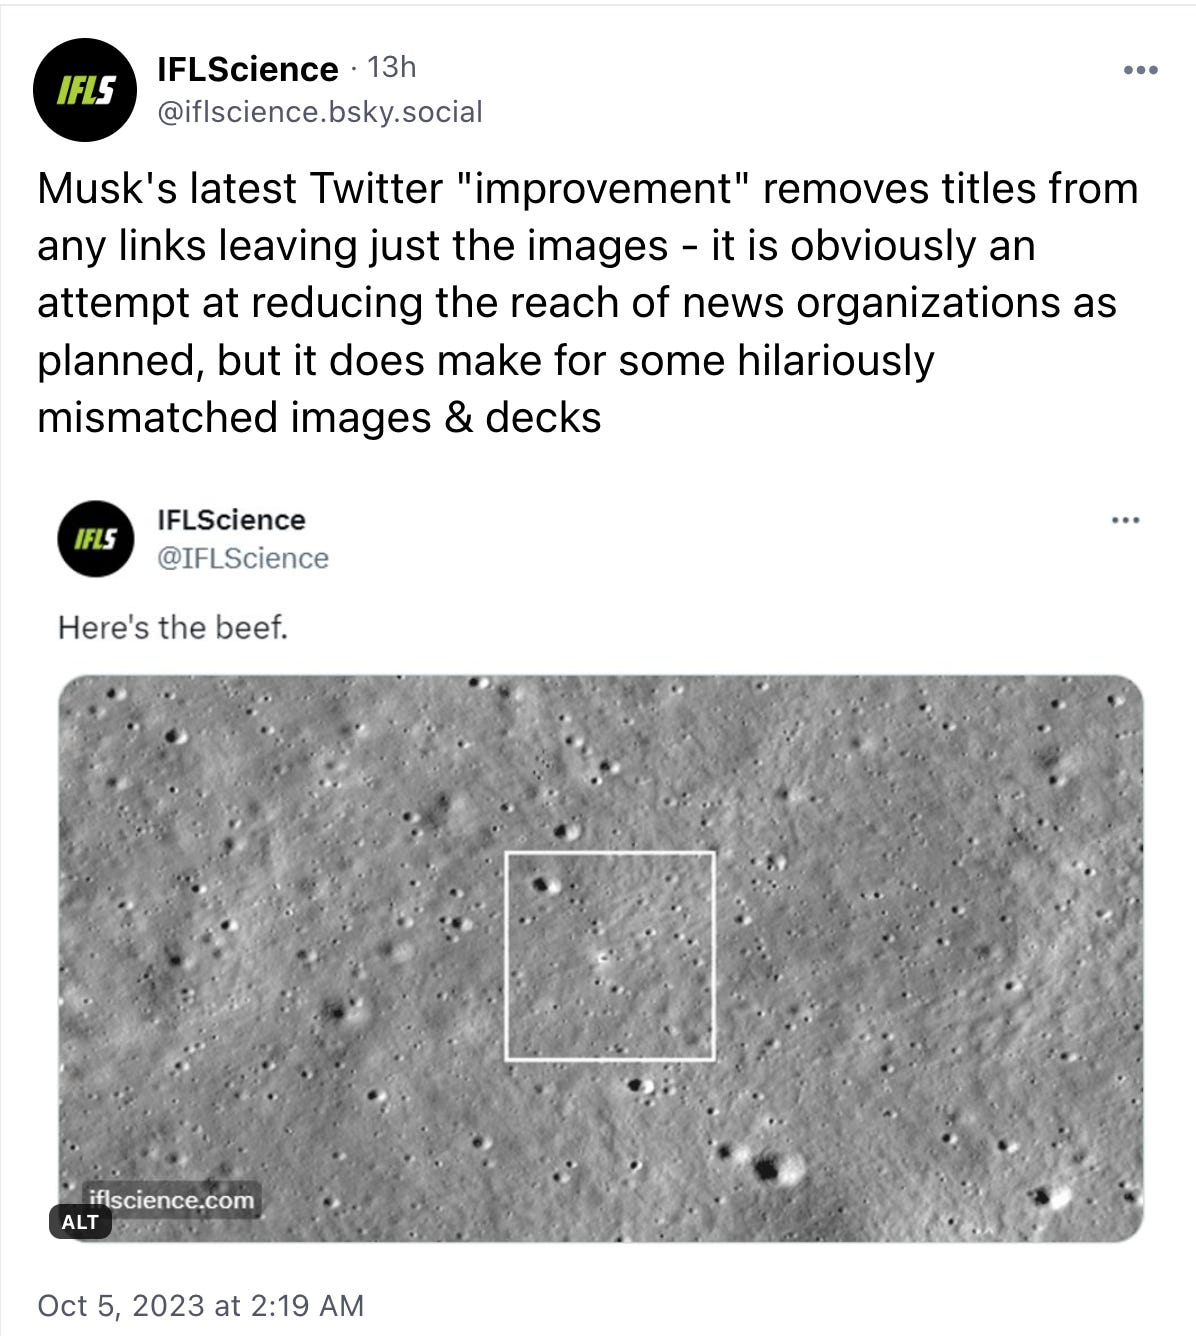 IFL Science post captioned “Musk's latest Twitter "improvement" removes titles from any links leaving just the images - it is obviously an attempt at reducing the reach of news organizations as planned, but it does make for some hilariously mismatched images & decks.” along with a screenshot of a tweet from IFLScience captioned “here’s the beef” and a close up of the surface of the moon.